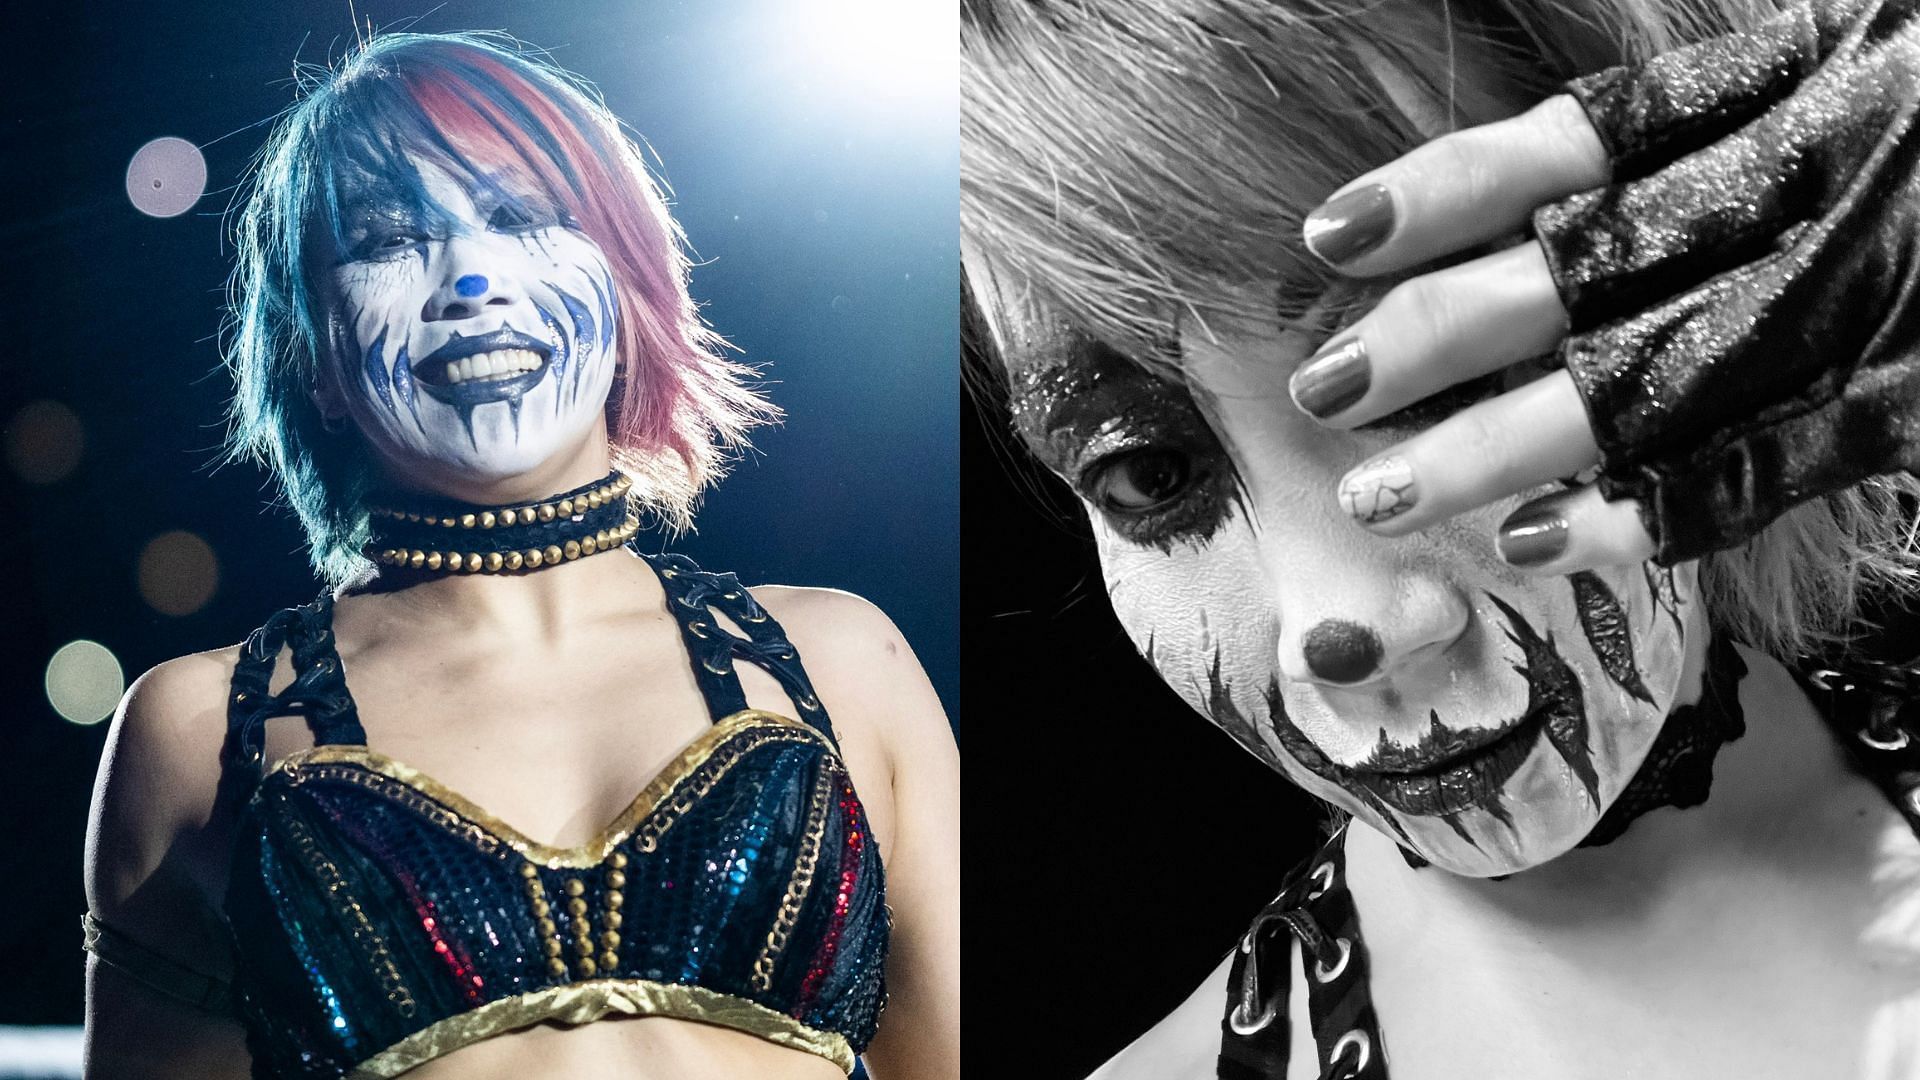 Asuka was drafted to WWE SmackDown this year.